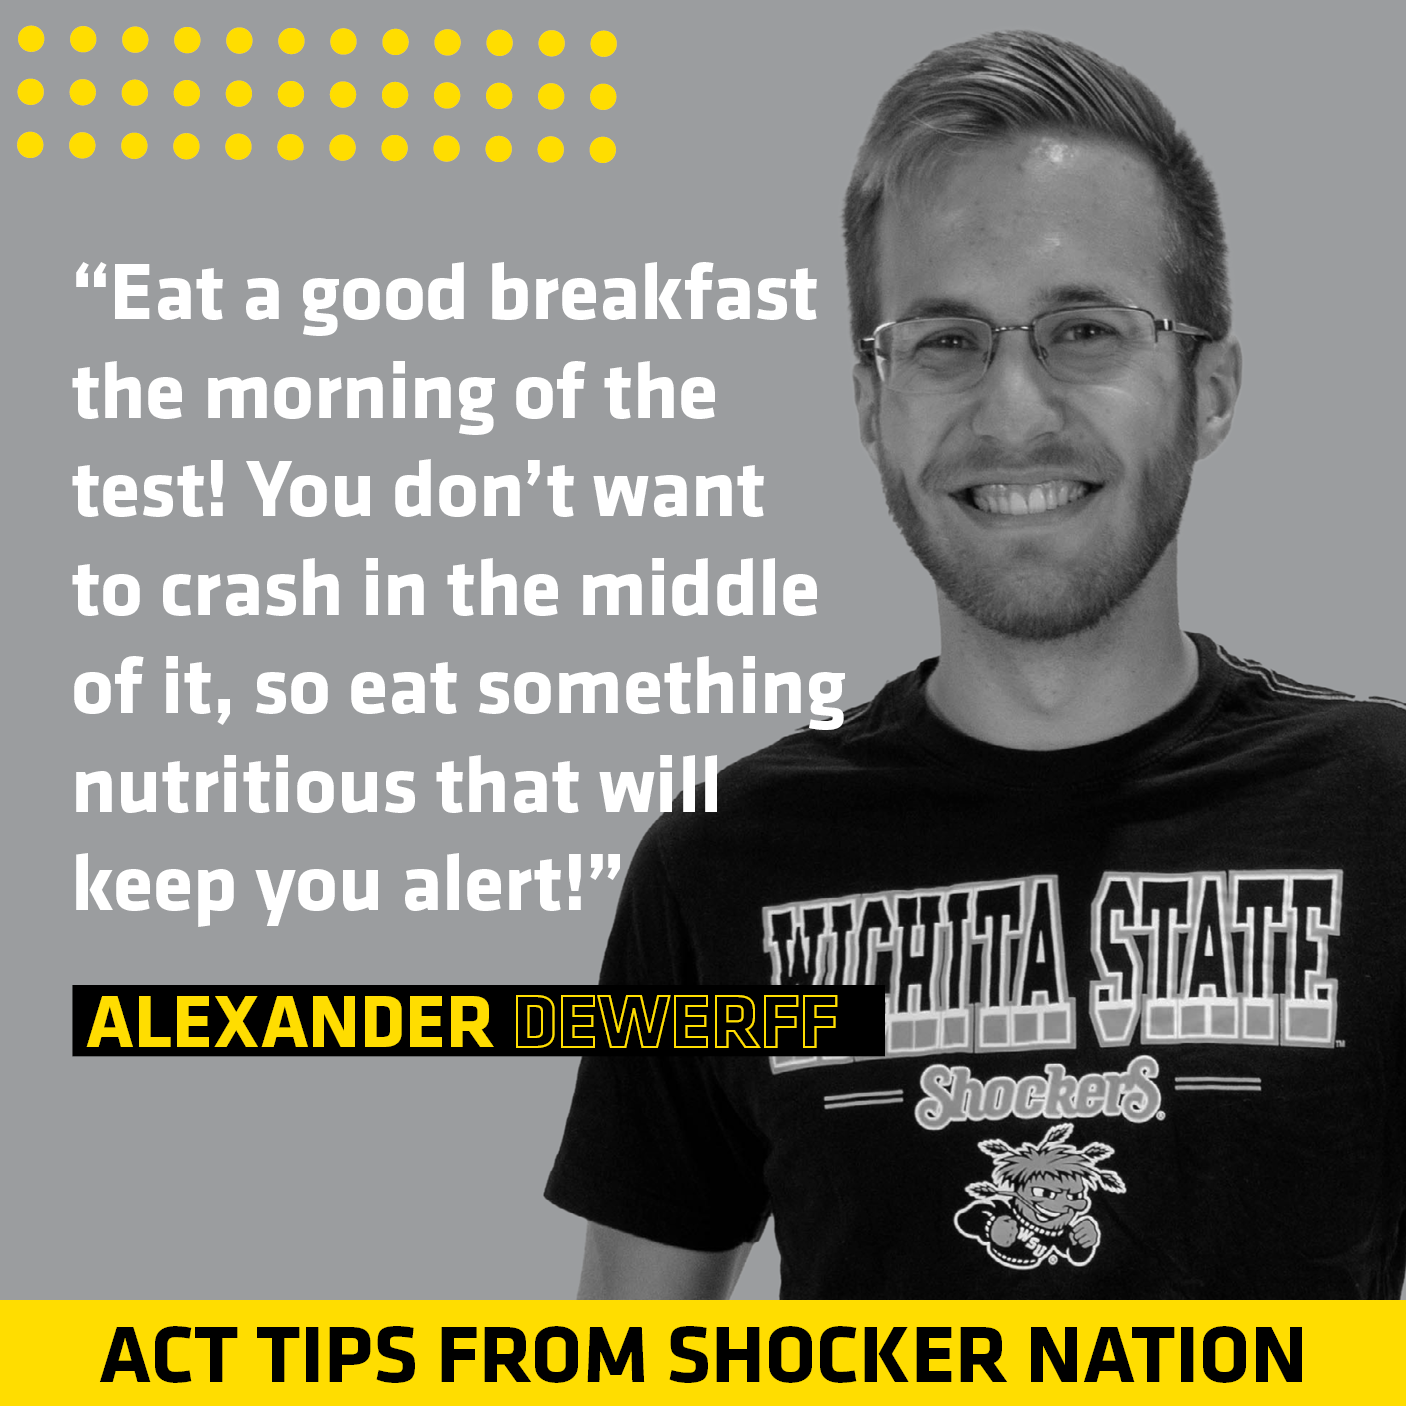 ACT Tips - Alexander Dewerff, "Eat a good breakfast the morning of the test! You don't want ot crash in the middle of it, so eat something nutritious that will keep you alert!"